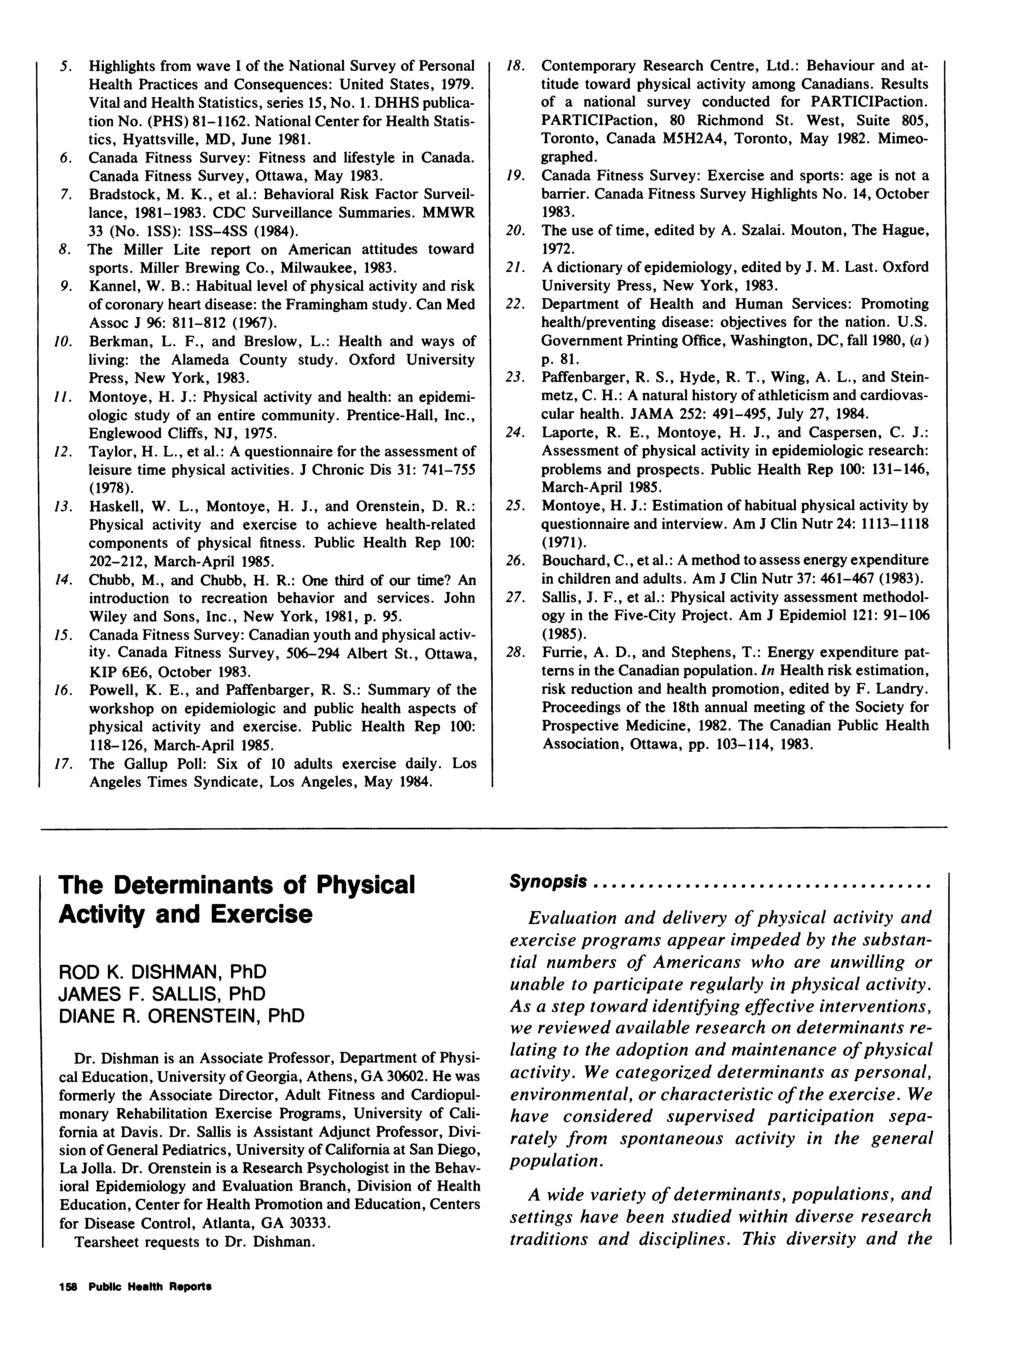 5. Highlights from wave I of the National Survey of Personal Health Practices and Consequences: United States, 1979. Vital and Health Statistics, series 15, No. 1. DHHS publication No. (PHS) 81-1162.